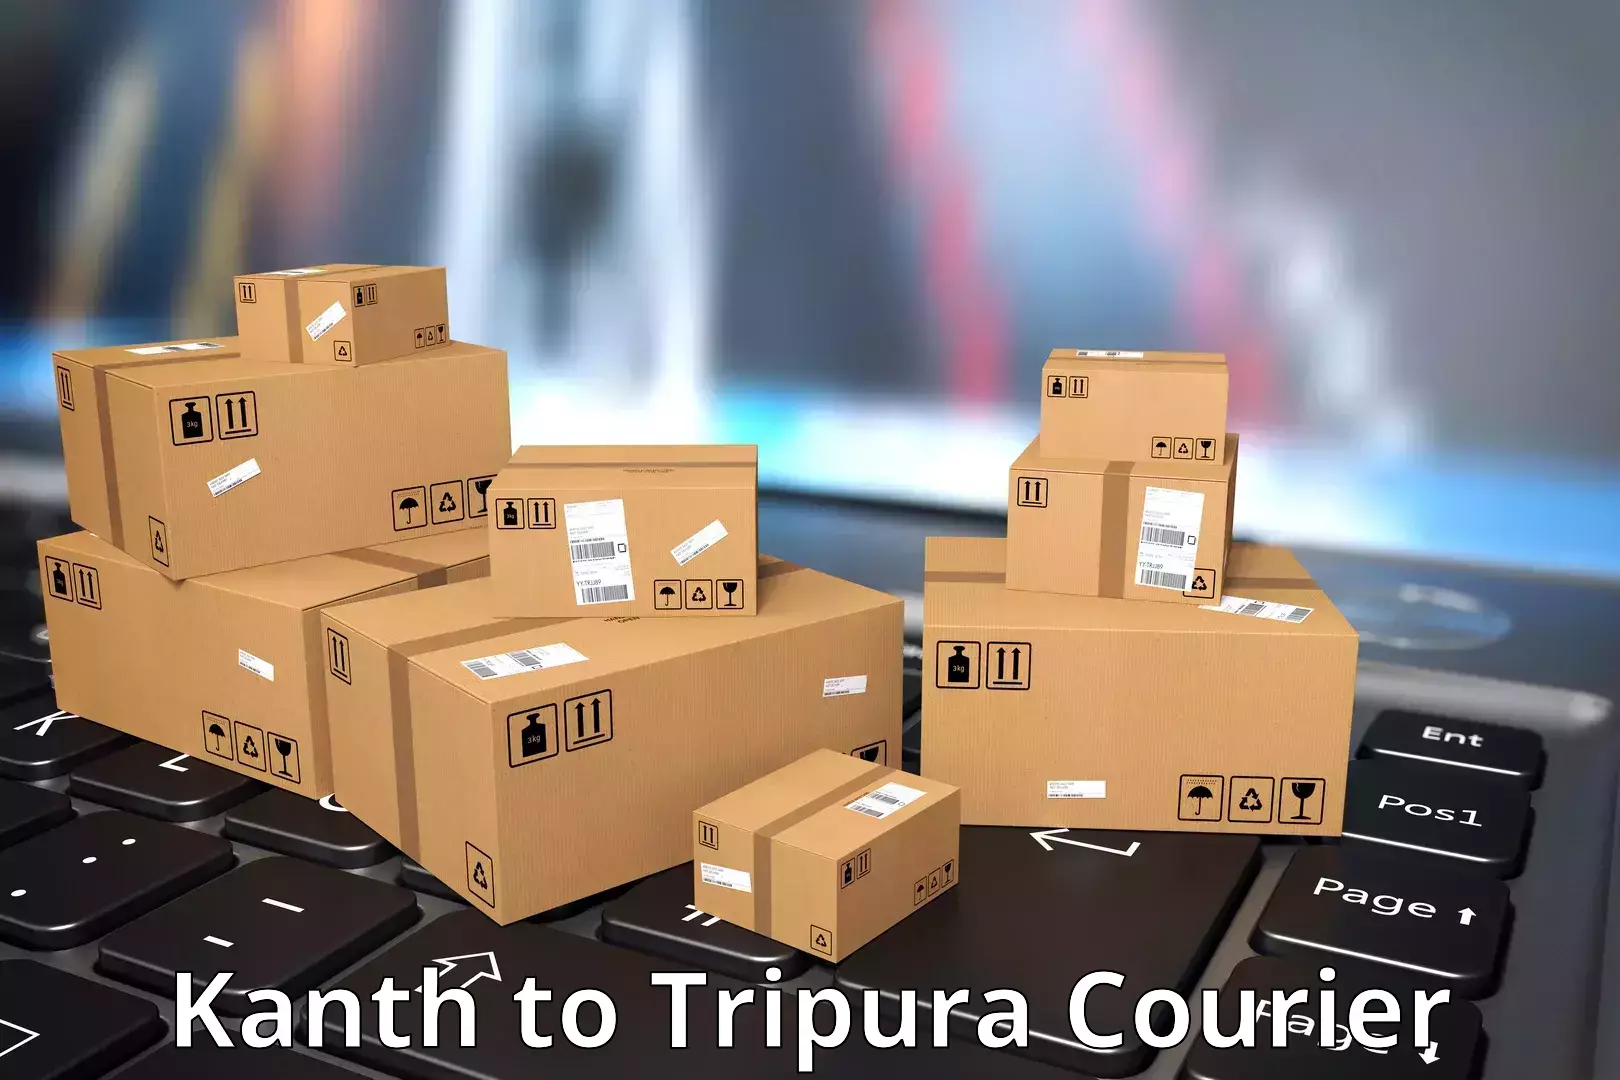 On-call courier service Kanth to Tripura